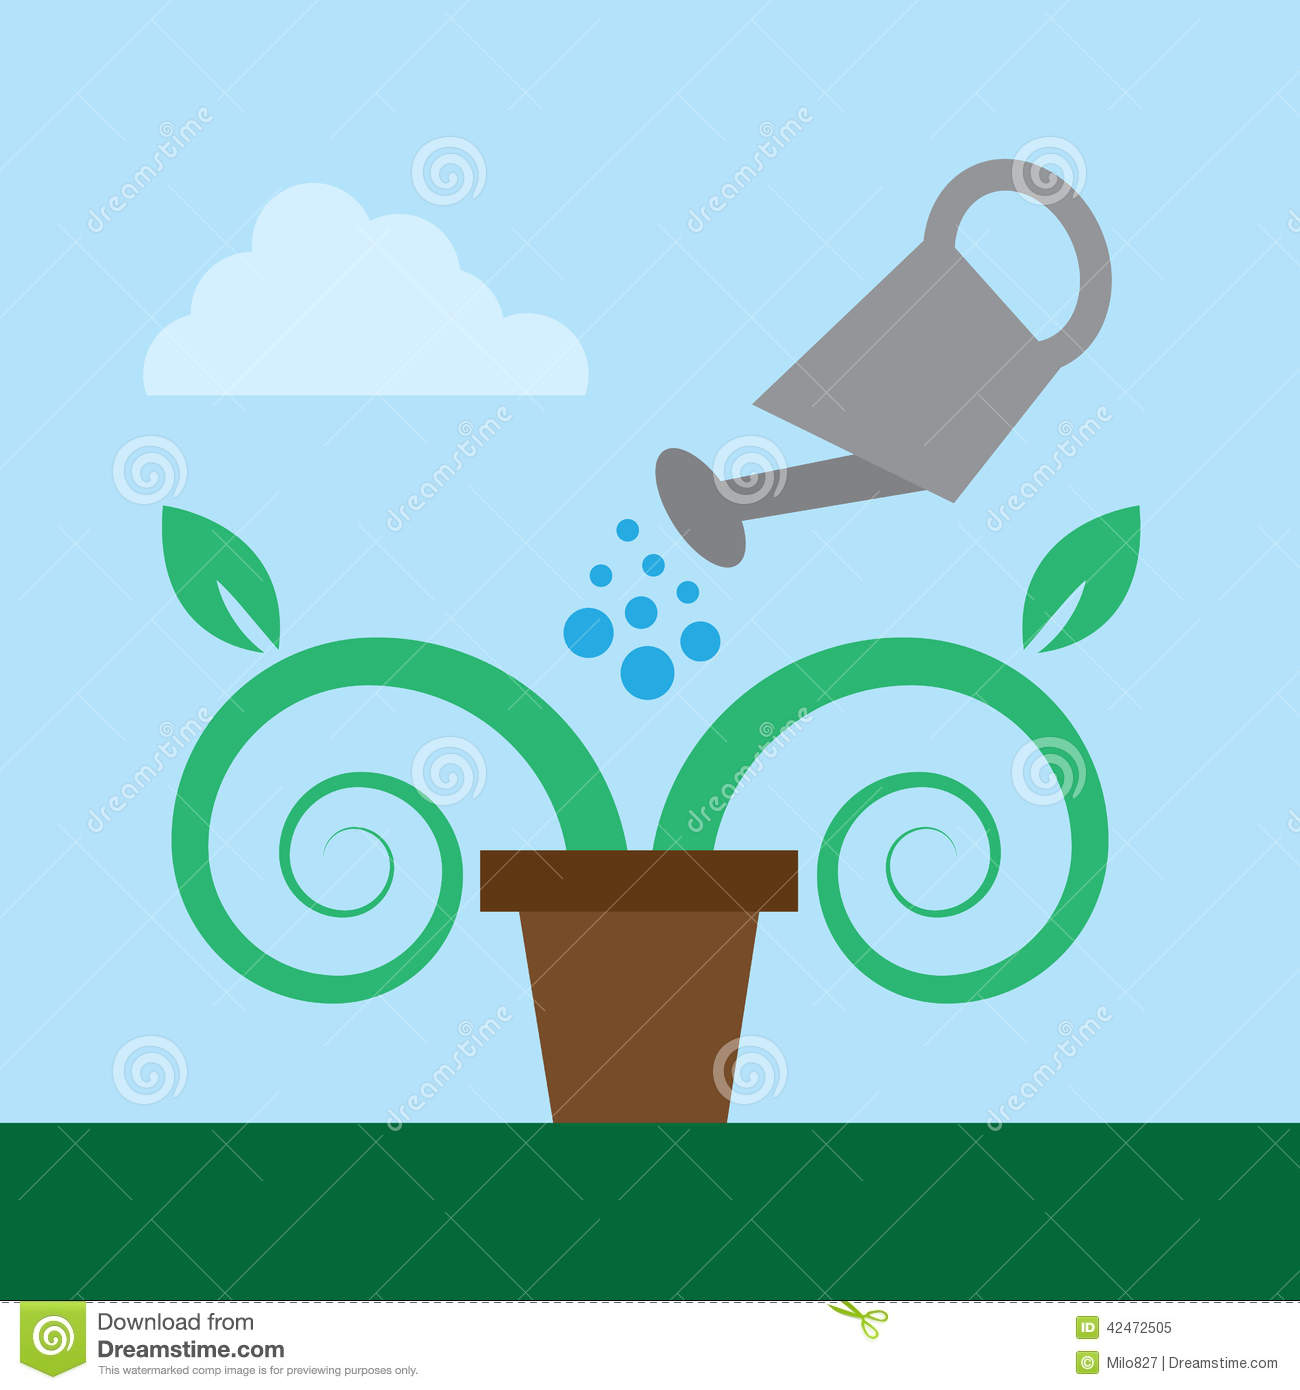 Watering Potted Plants